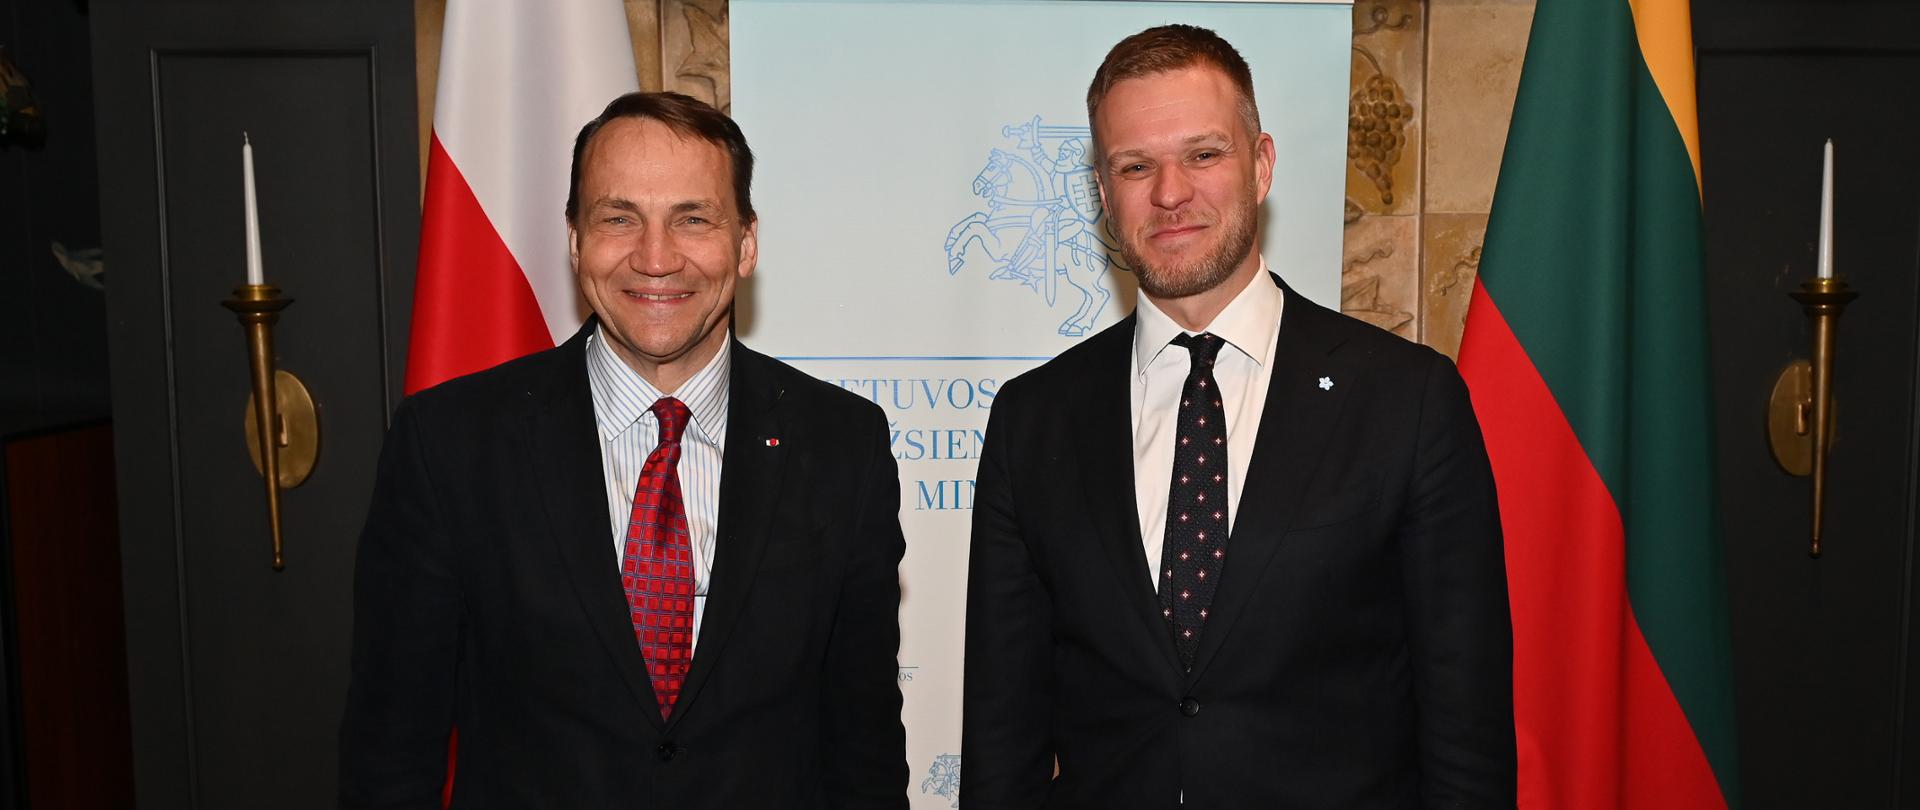 Minister Radosław Sikorski takes part in Snow Meeting conference in Lithuania